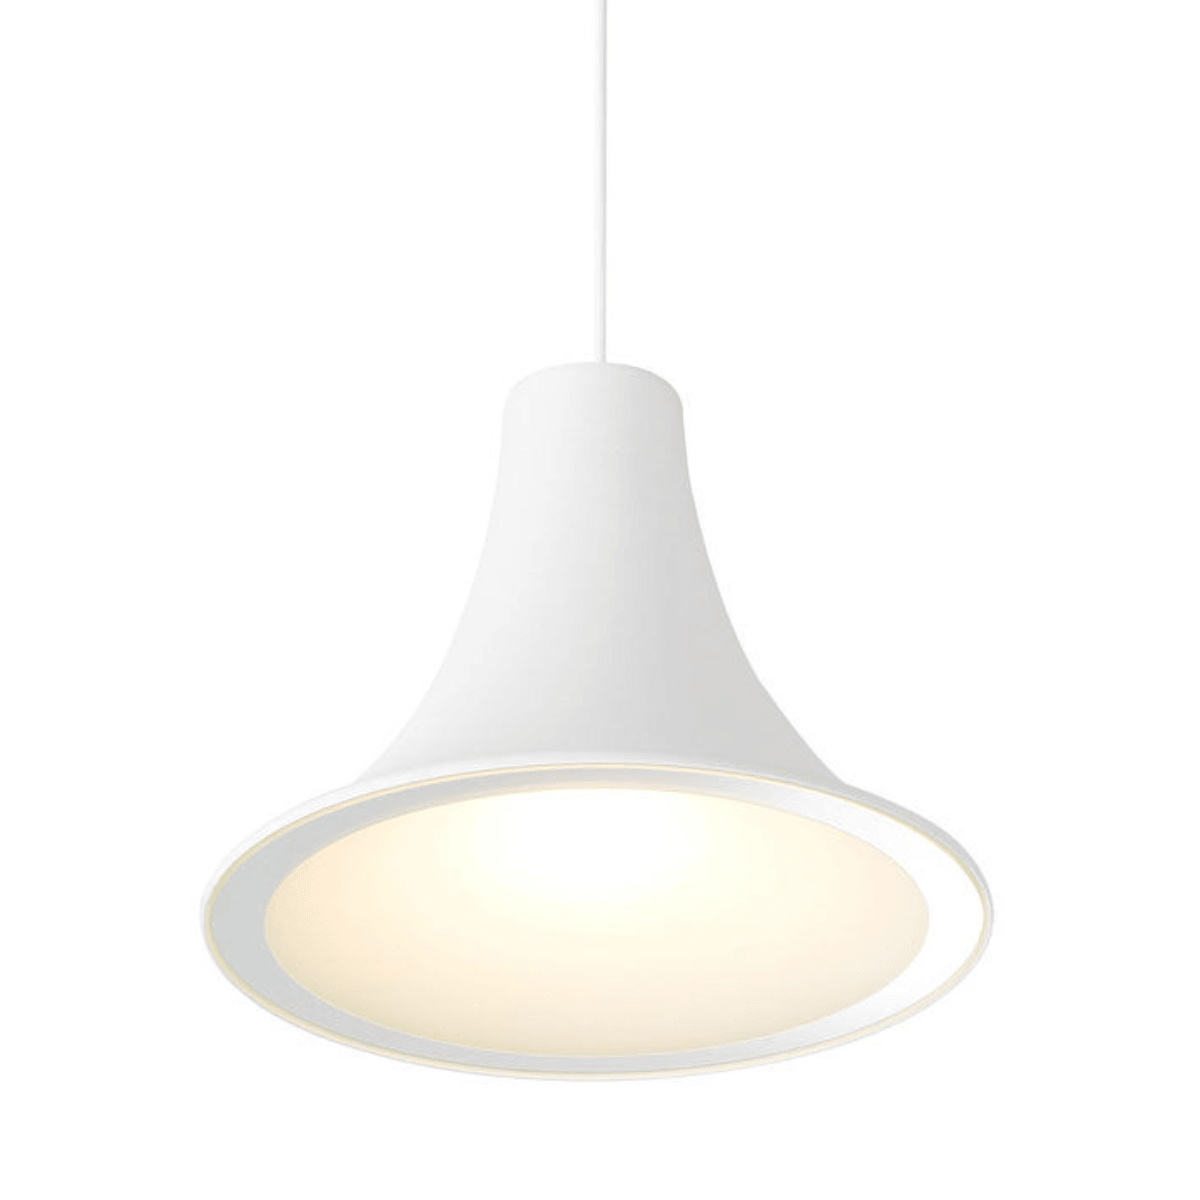 SIRENS FROSTED GLASS - Pendant Light - Luminesy